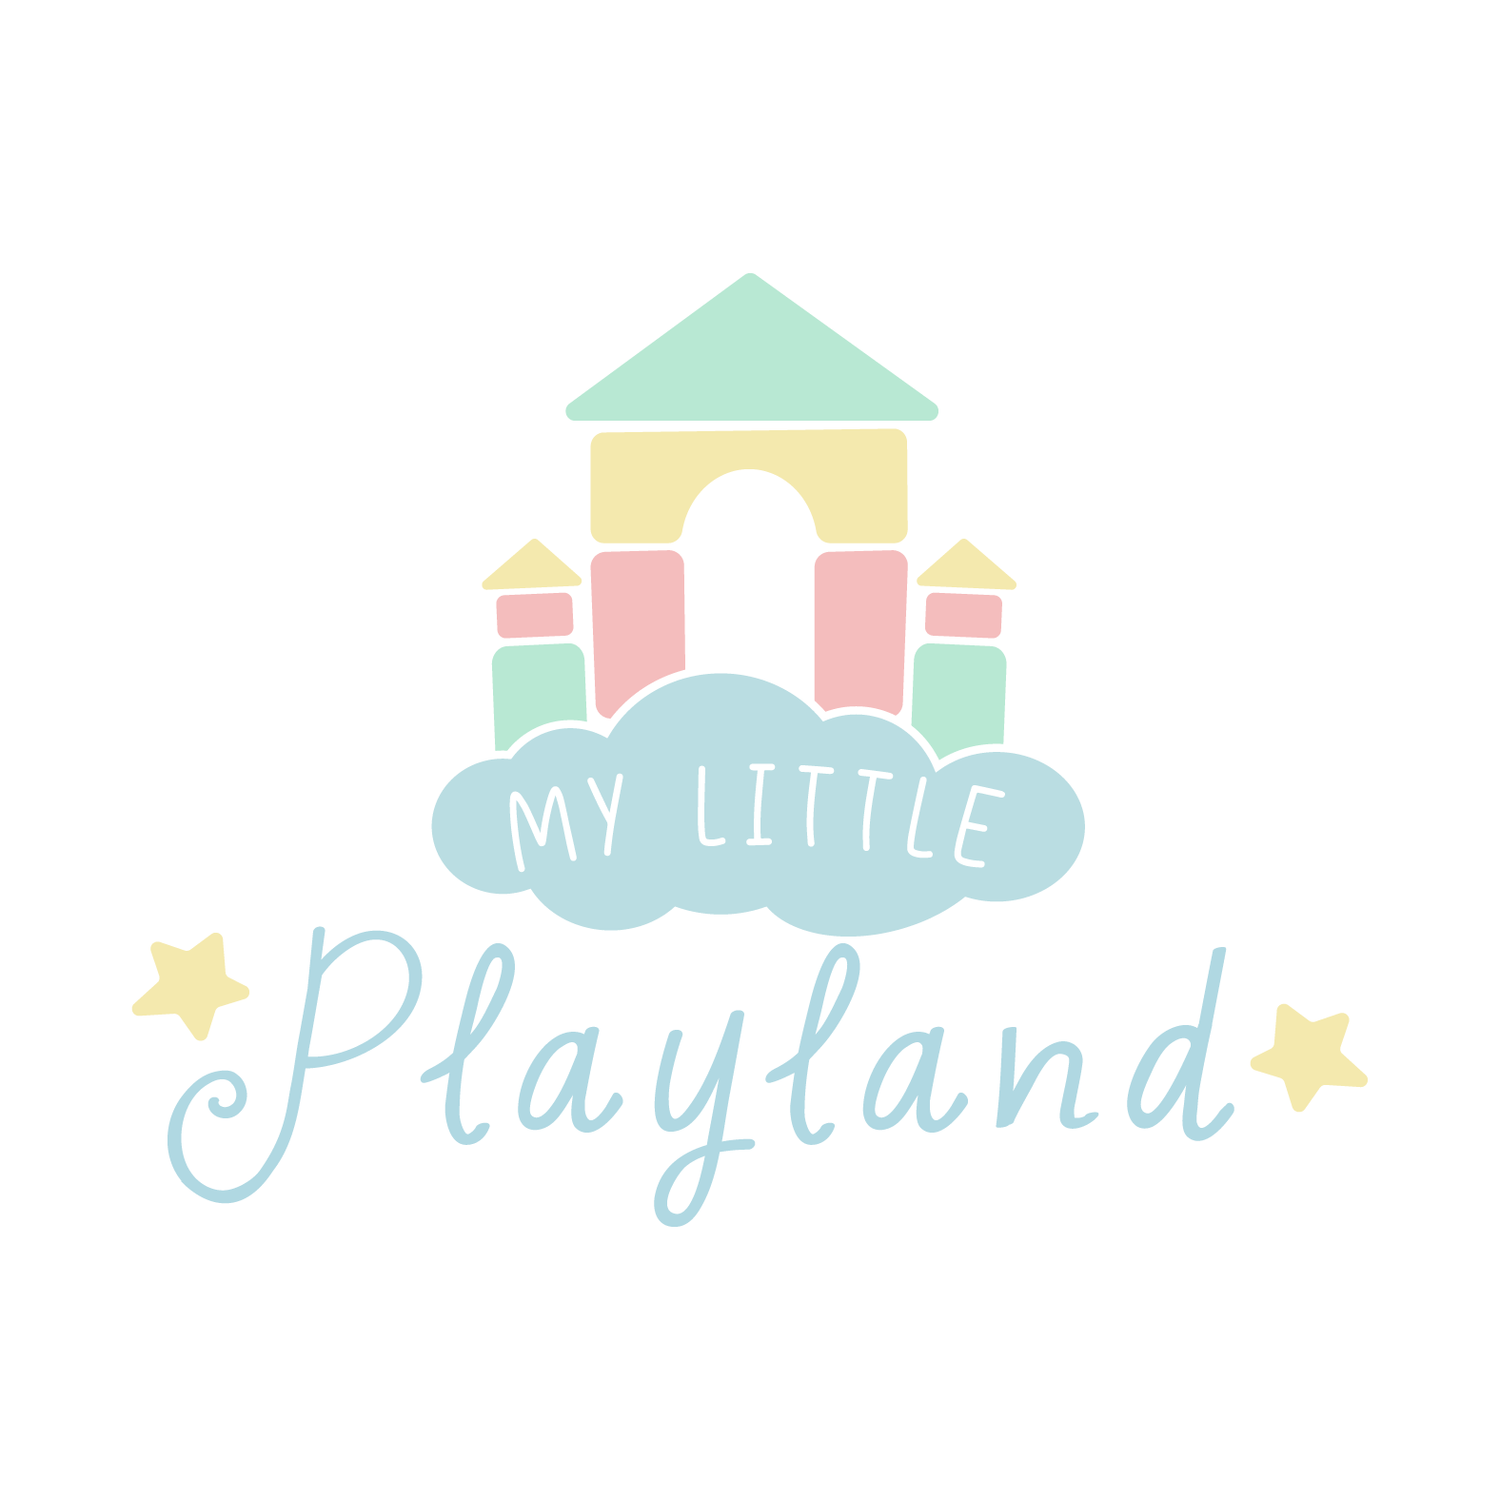 My Little Playland